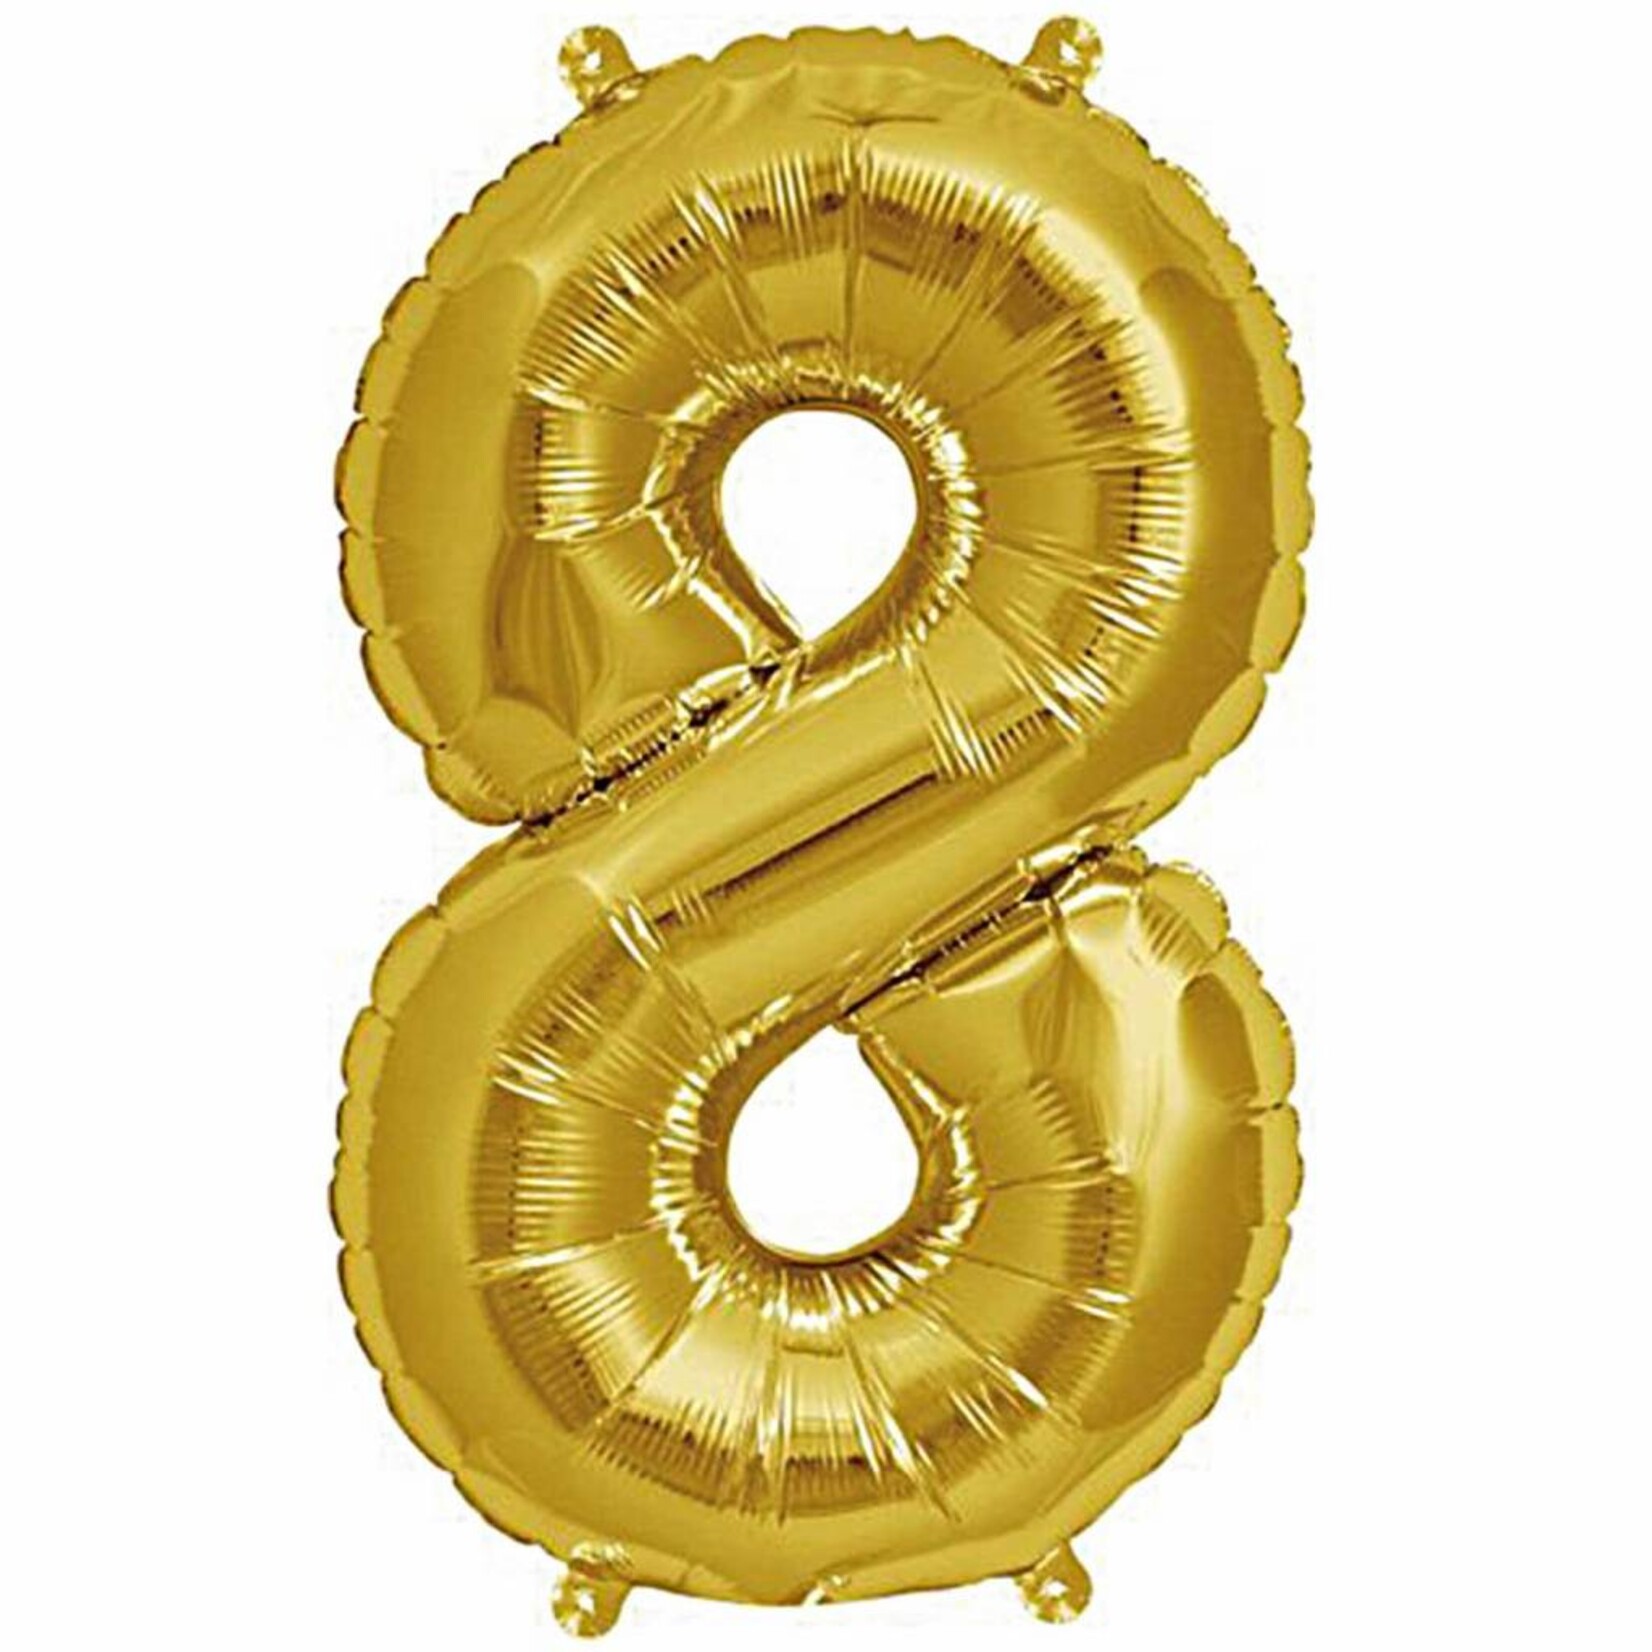 RICO Foil numberballoon large gold 8